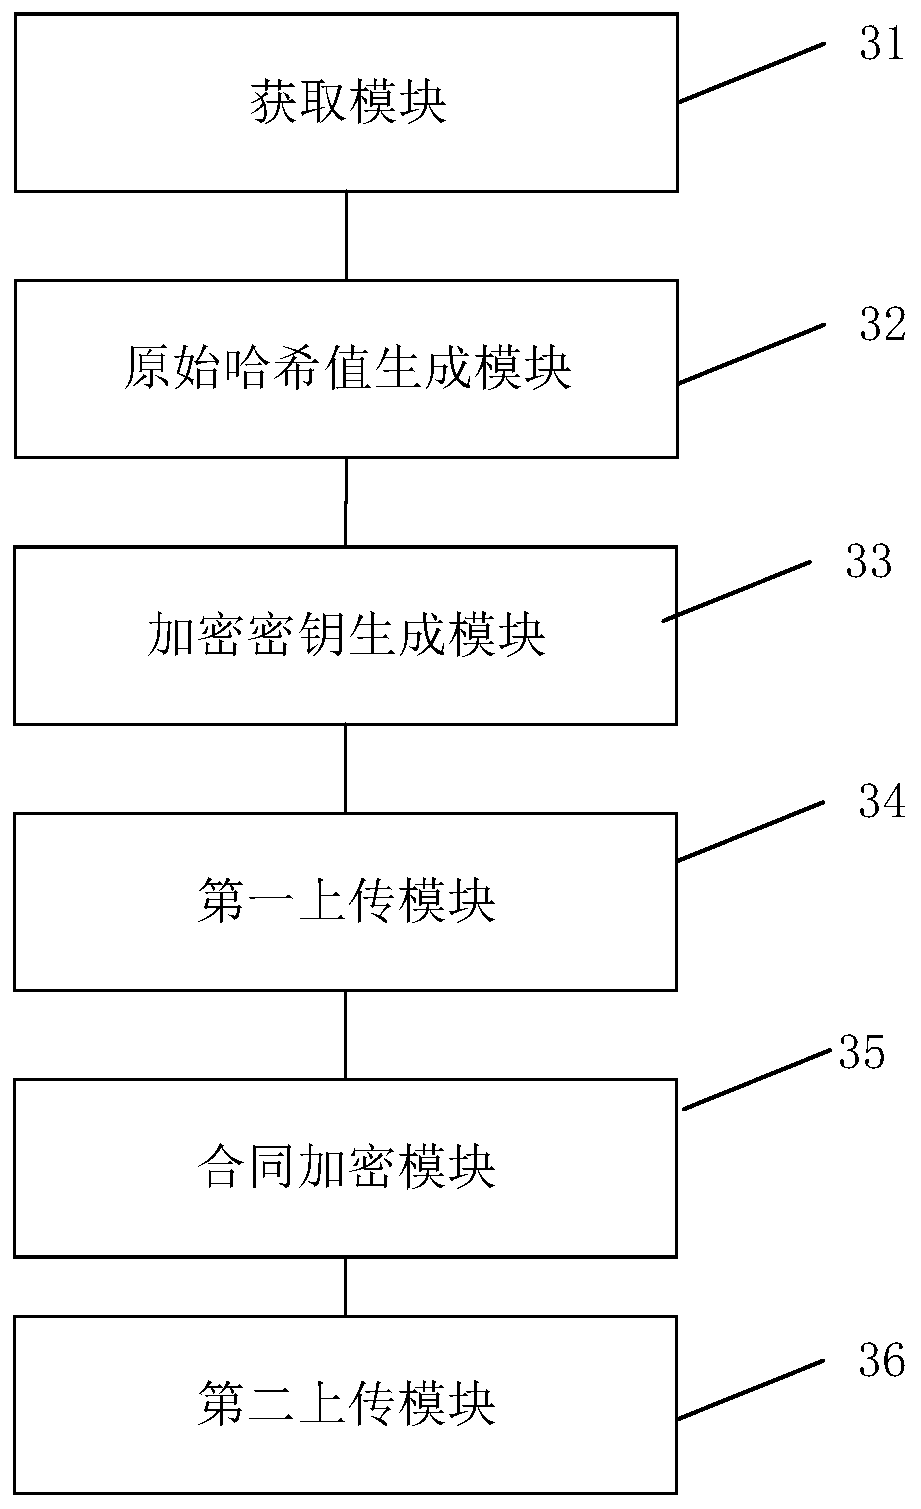 Electronic contract data encryption storage method and signing client